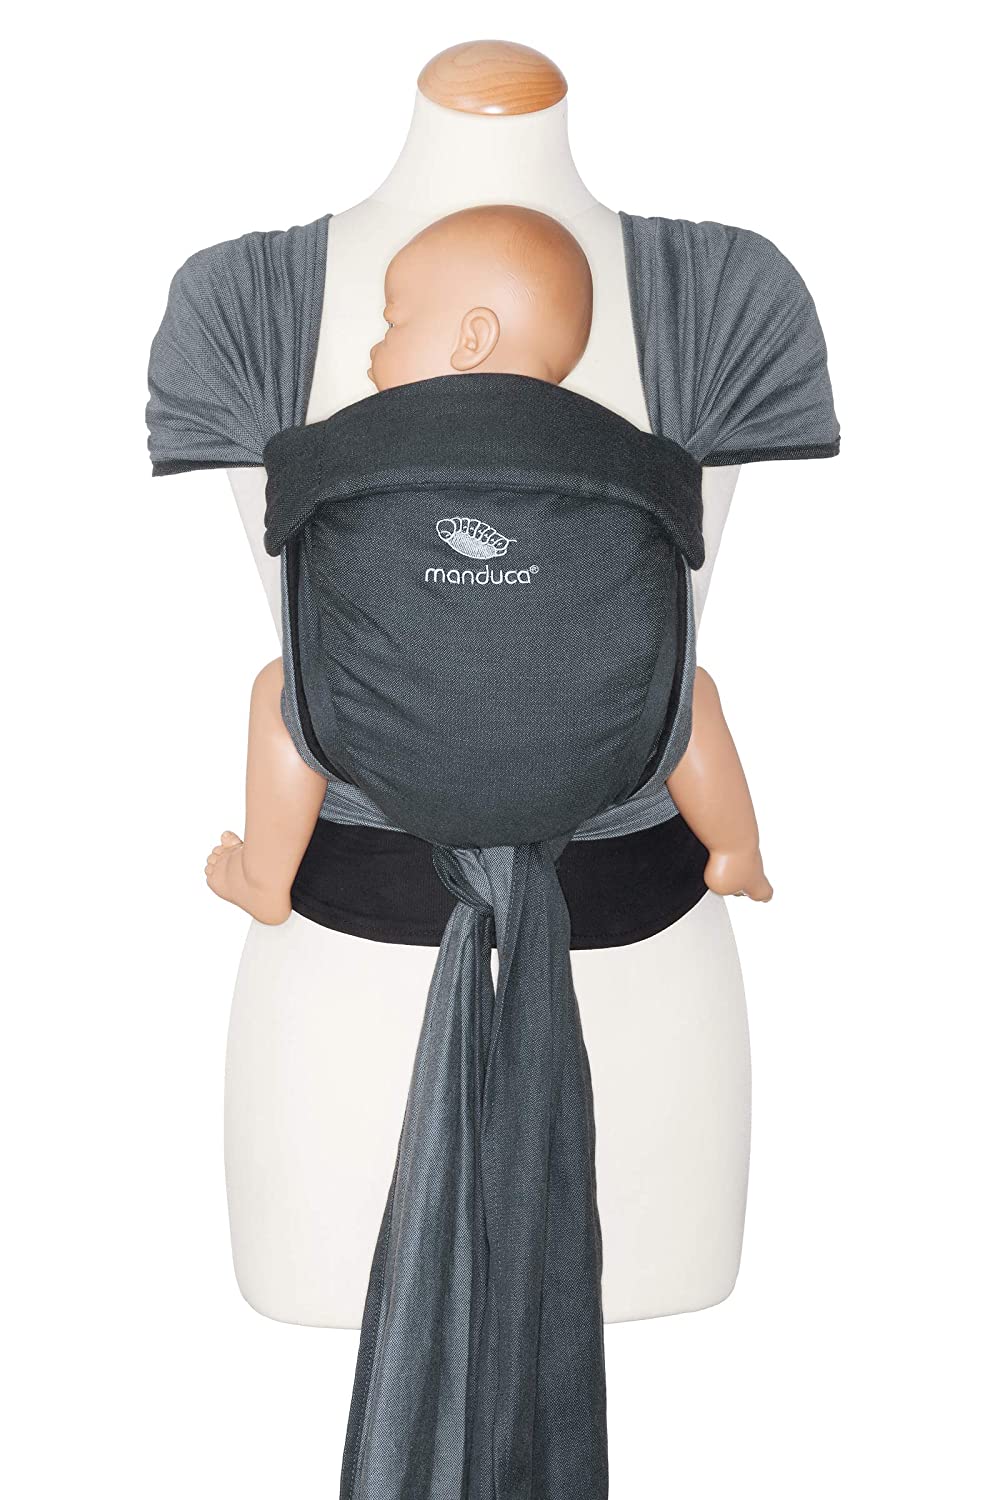 manduca Twist Baby Carrier > Anthracite-Black < Baby Carrier and Sling for Newborns & Babies from Birth I Fan Carrier I Soft Belly Belt I Organic Cotton Grey / Black